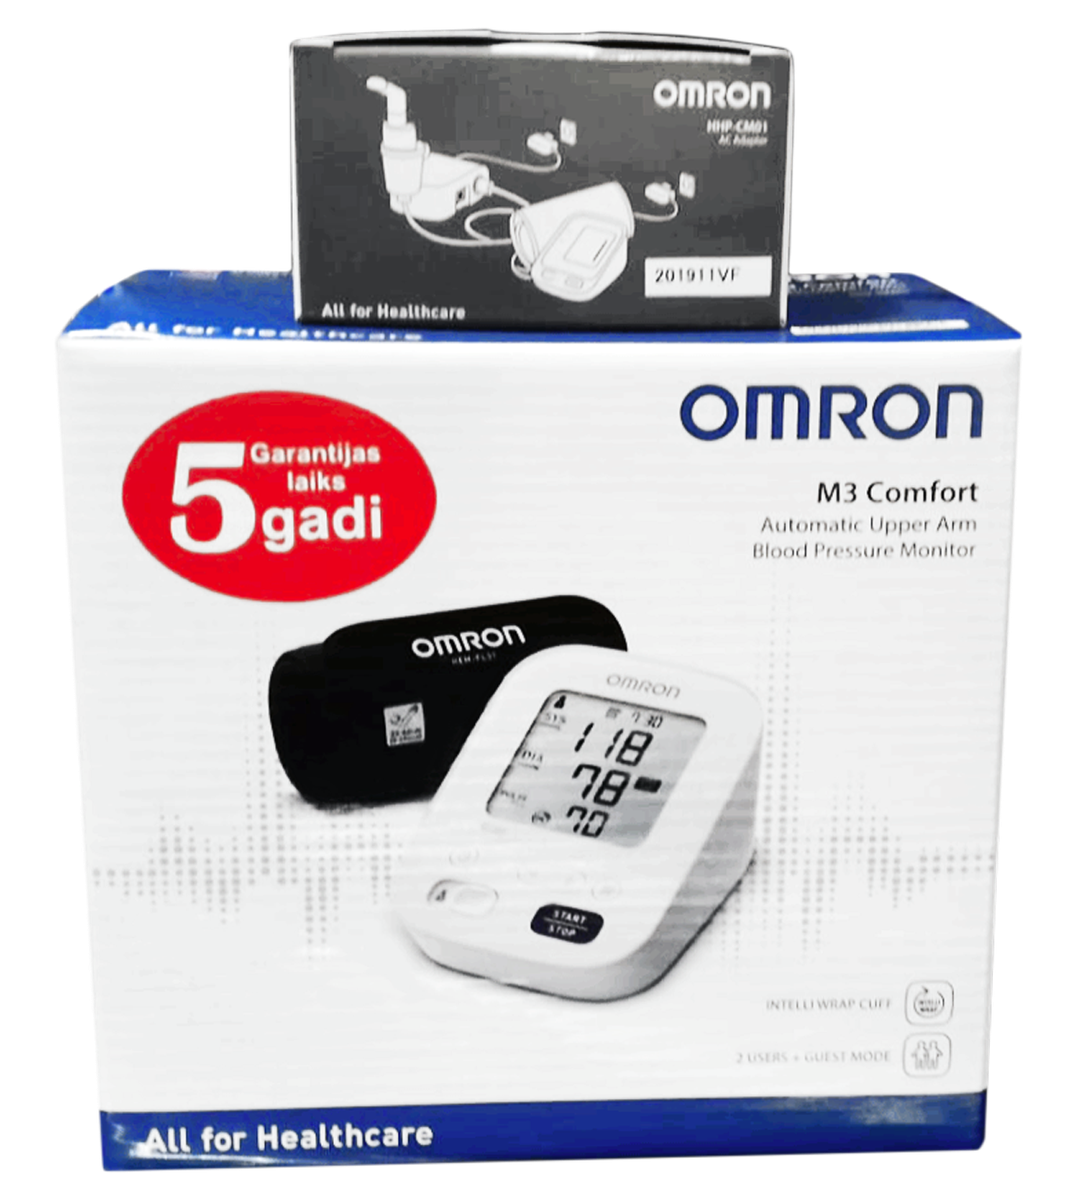 Omron M3 Comfort how use? Omron blood pressure 